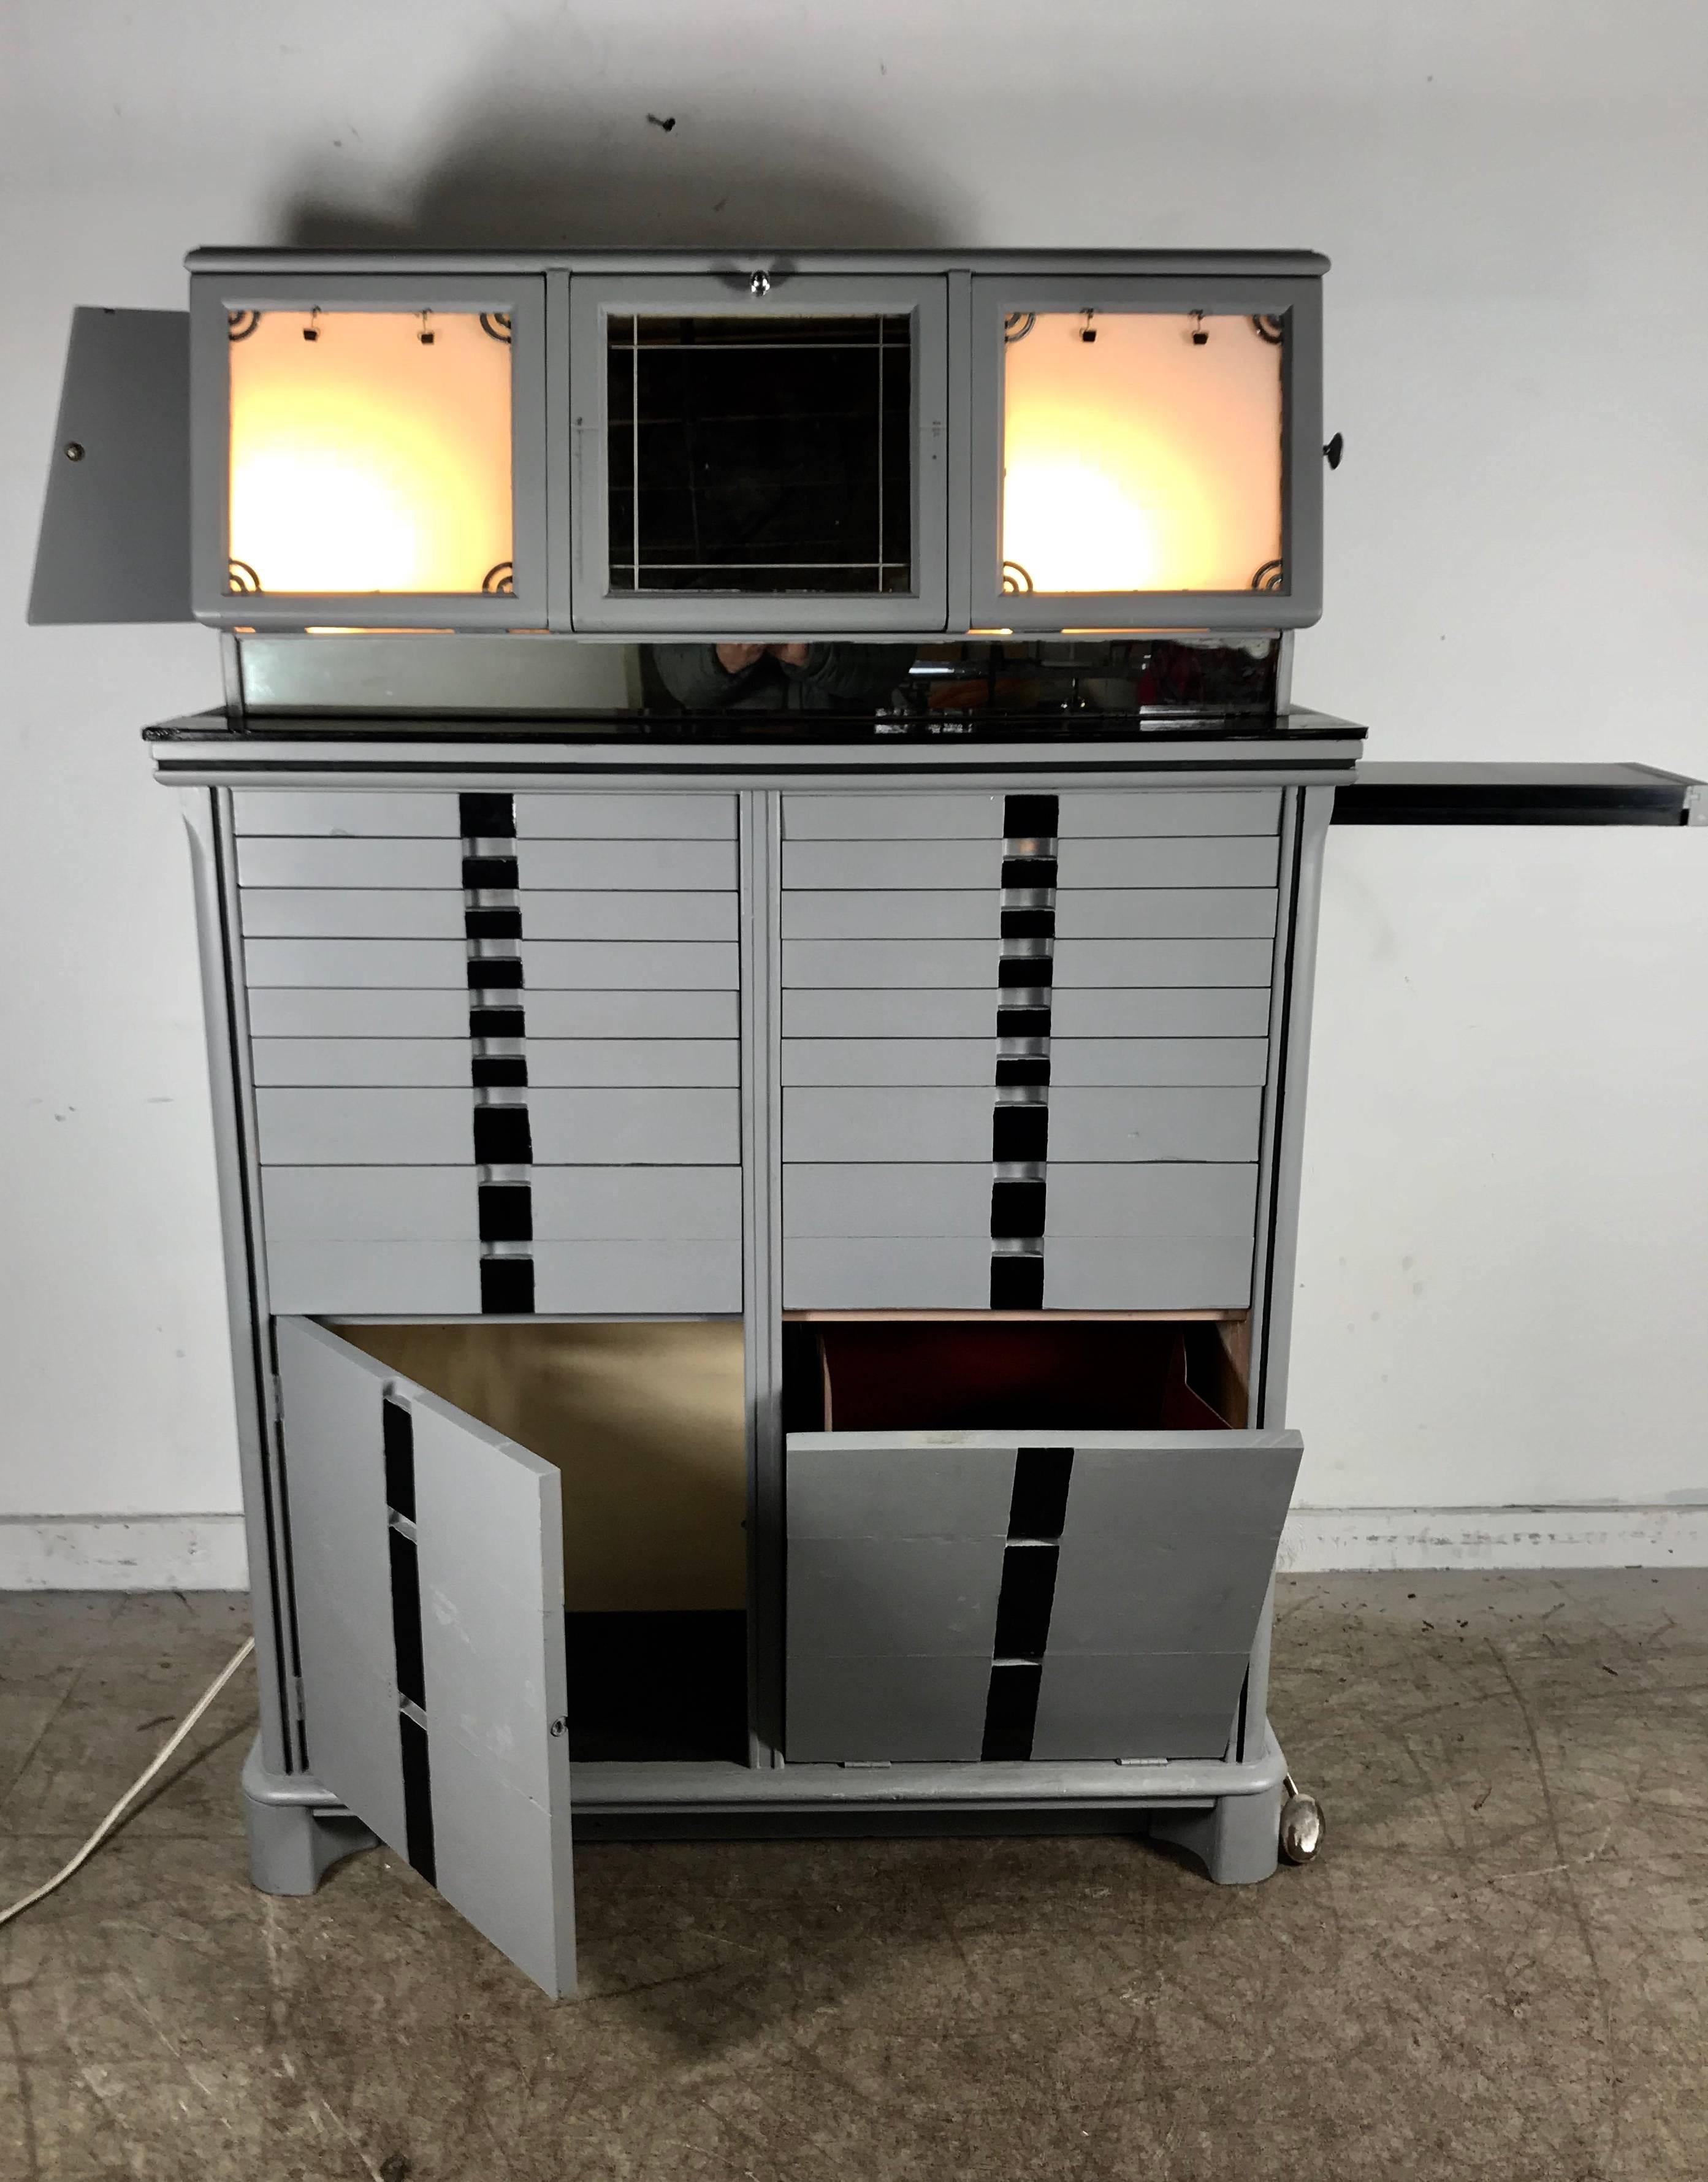 Rare Art Deco Illuminated Multi drawer Dental Cabinet  by the Weber Dental manufacturing company .Amazing cabinet featuring original frosted glass back-lit panels with original clips for holding x-rays, Mirrored pull down door with milk glass shelf,